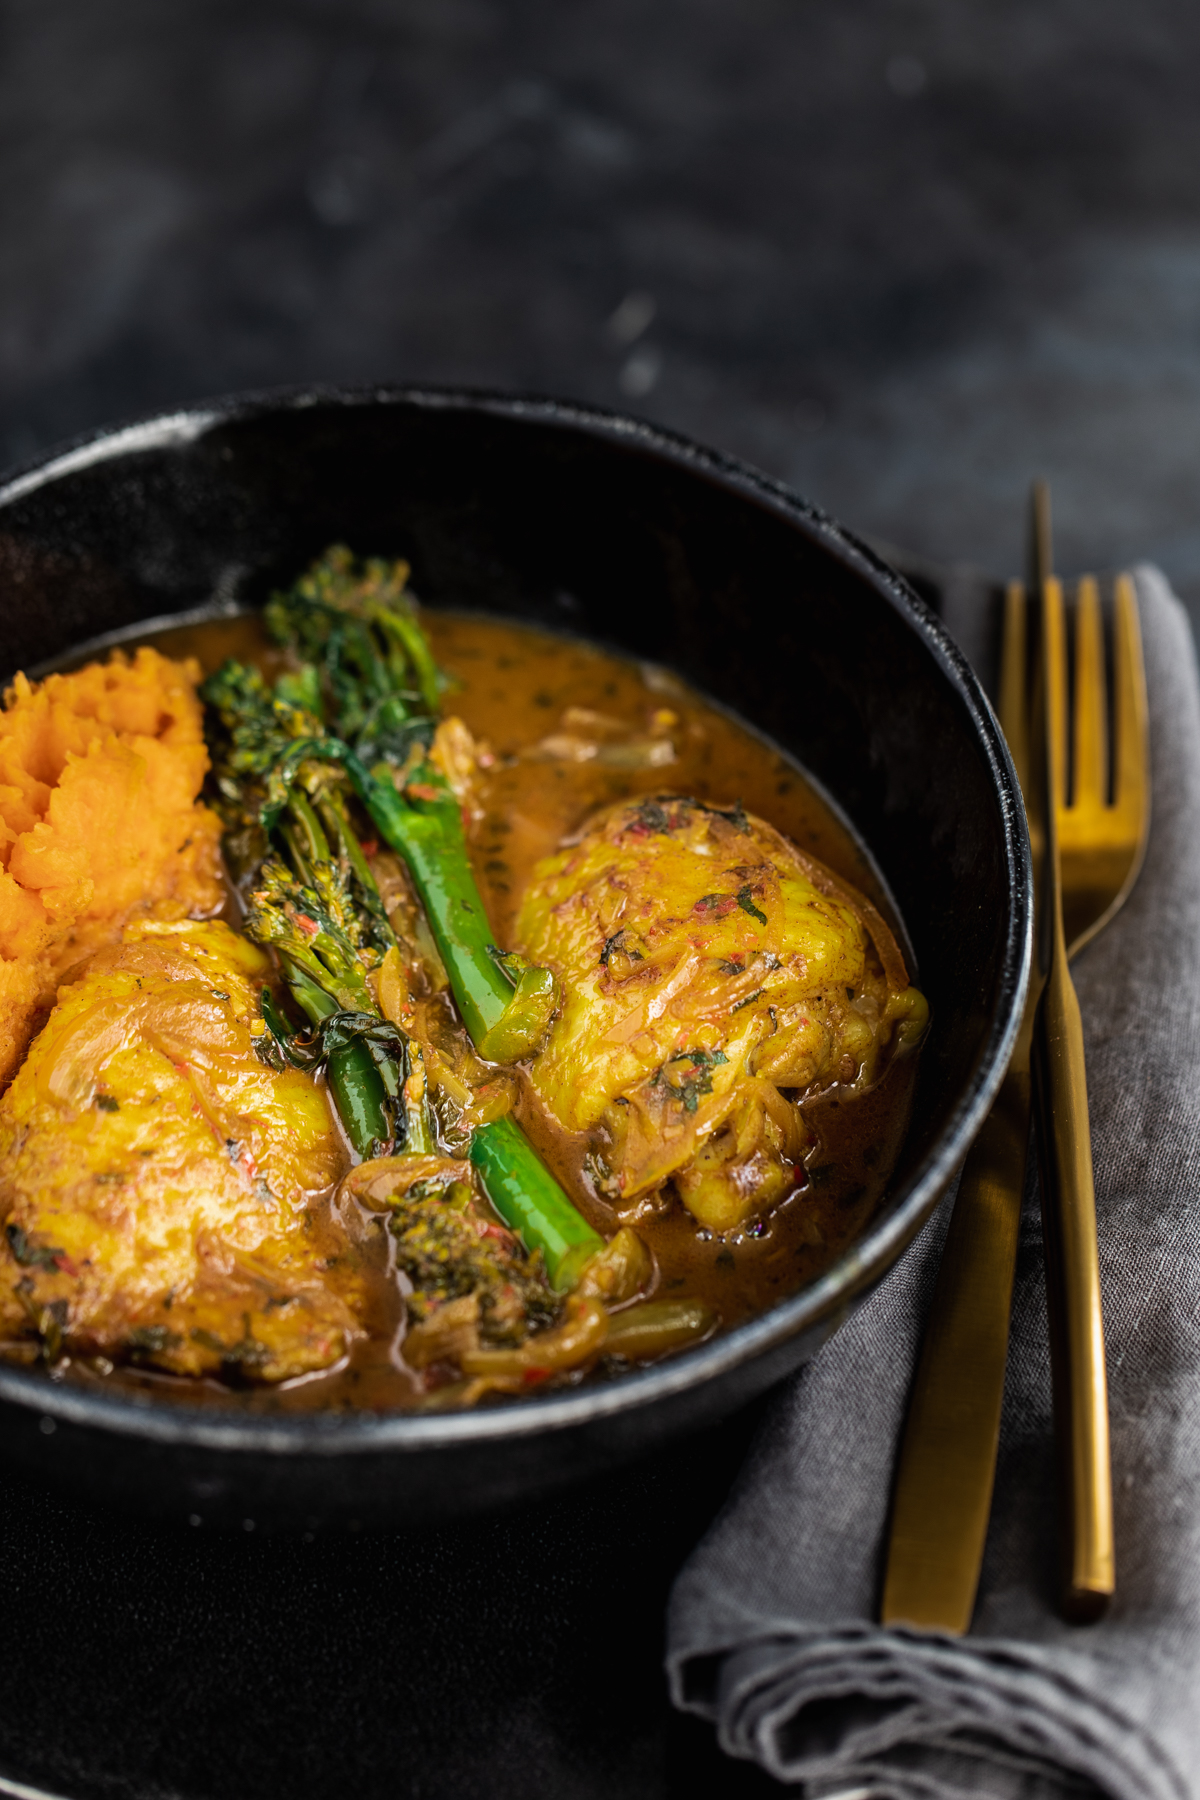 Malaysian Chicken Thigh Curry with broccoli and sweet potato in a black bowl